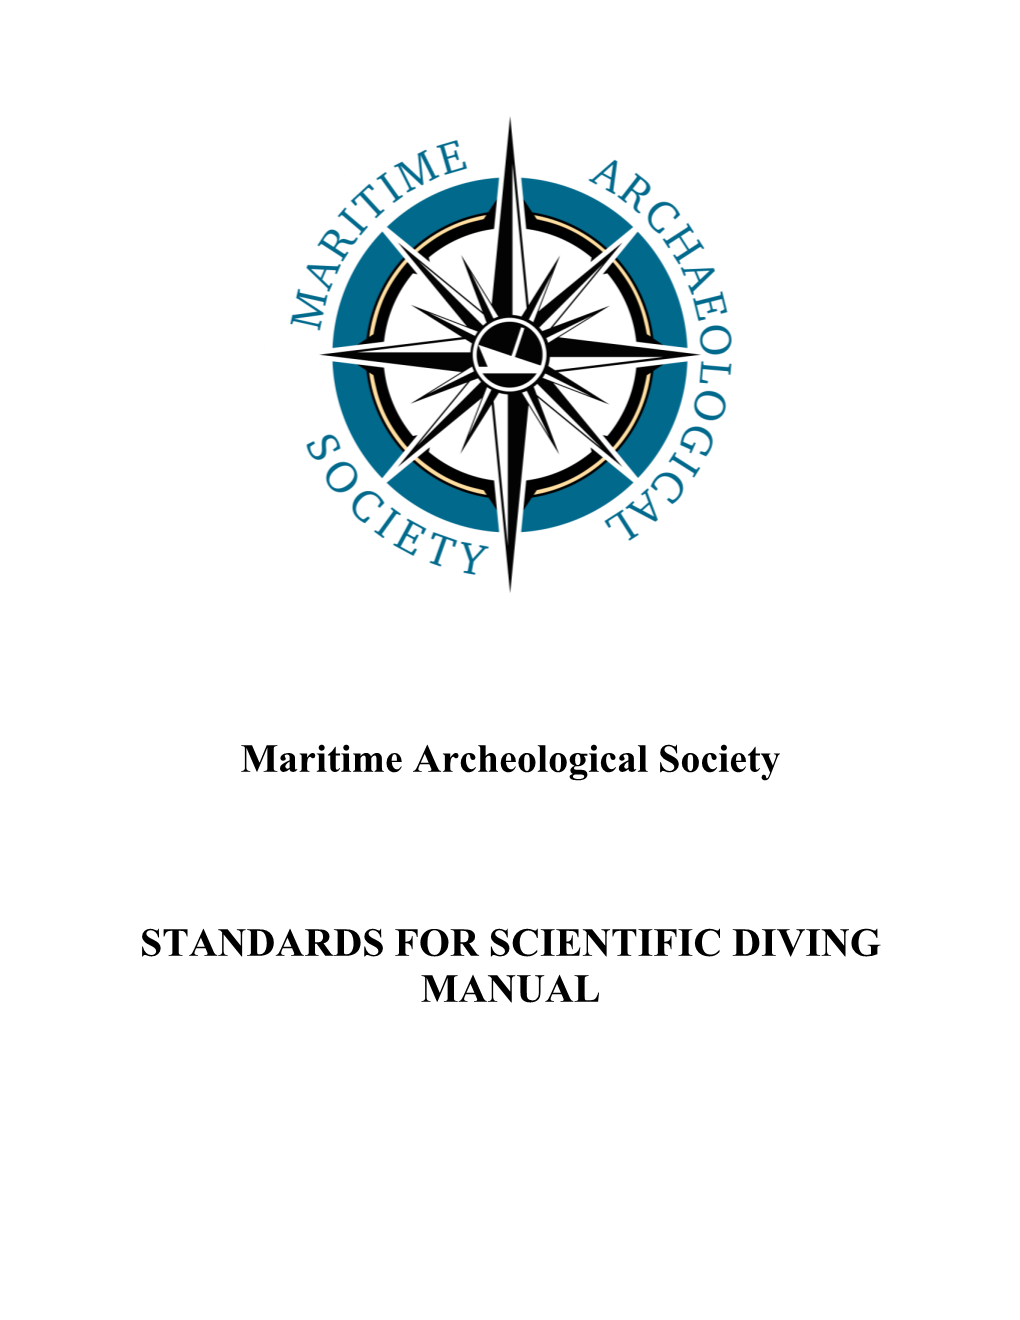 Maritime Archeological Society STANDARDS for SCIENTIFIC